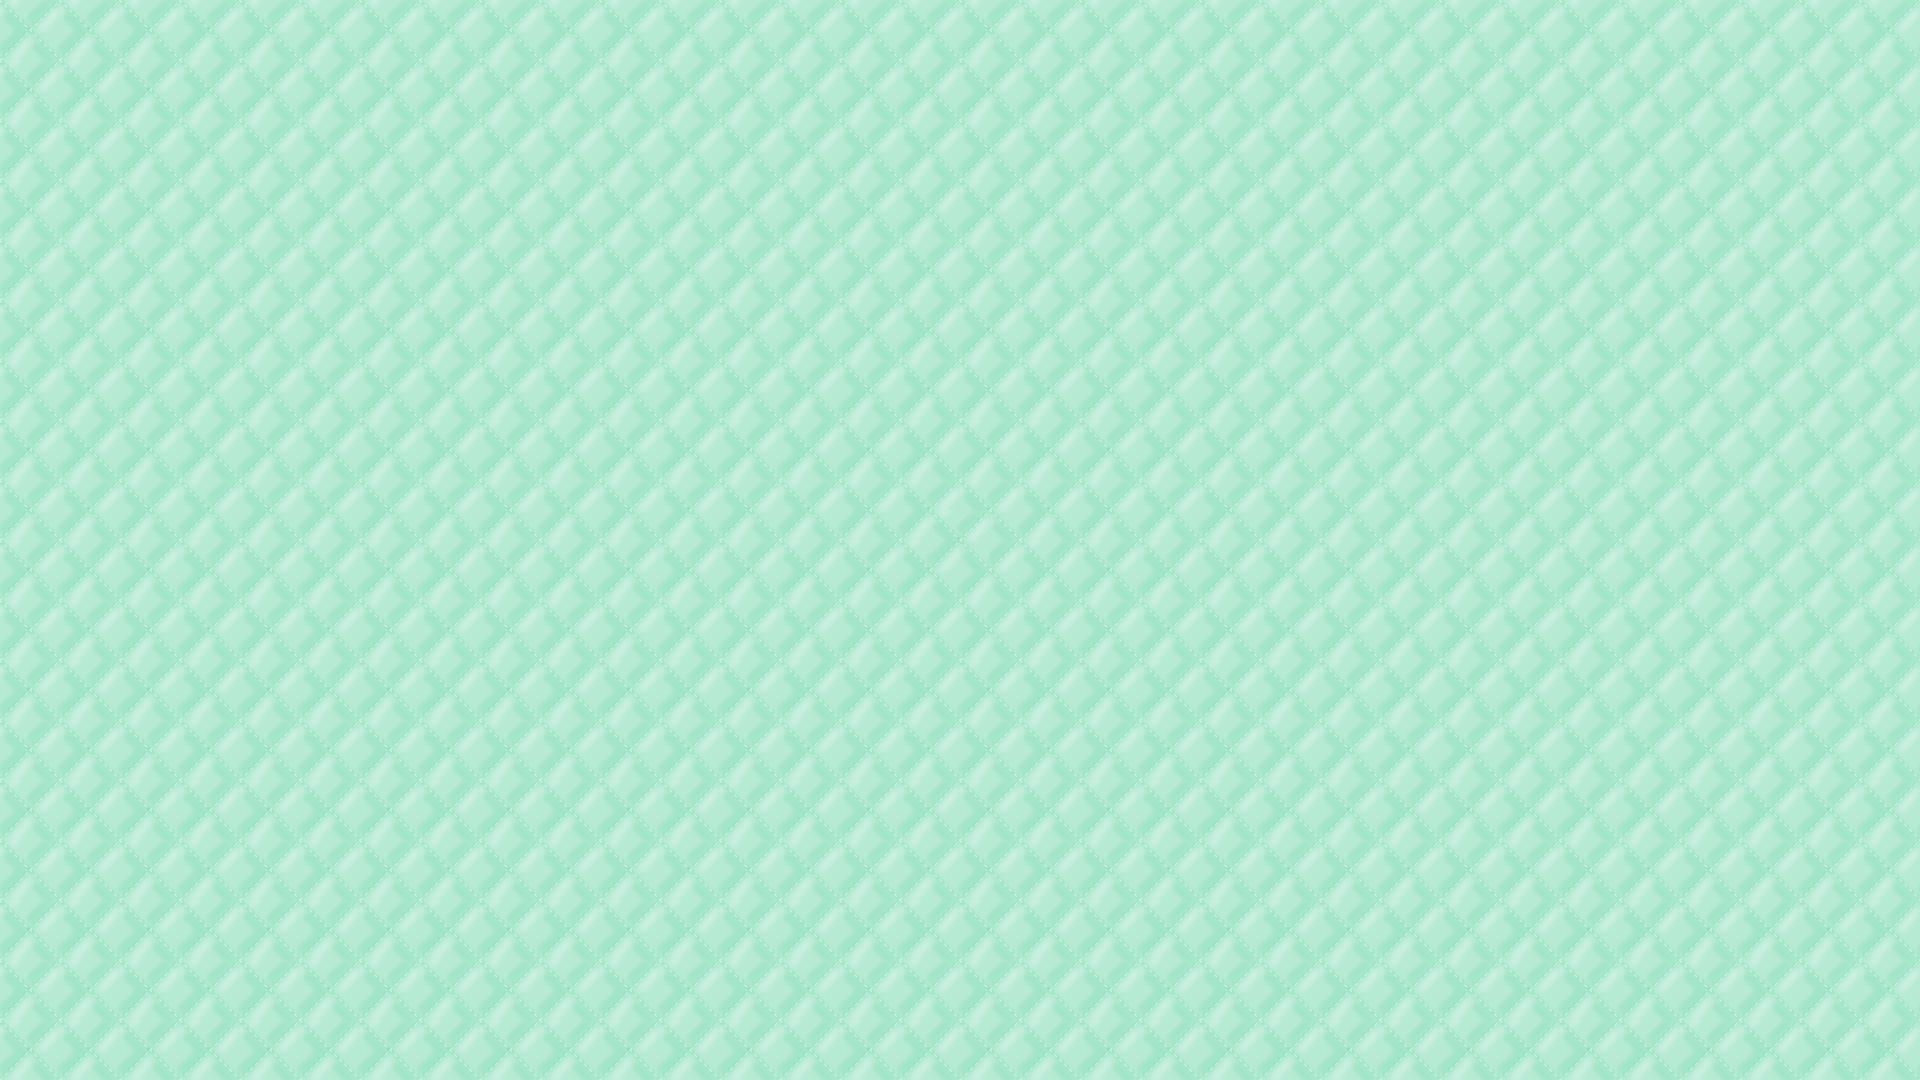 Free download Mint Green Background Tumblr Image Picture Becuo [1920x1080] for your Desktop, Mobile & Tablet. Explore Mint Green Wallpaper Image. Mint Green Wallpaper Image, Mint Green Wallpaper, Mint Green Wallpaper